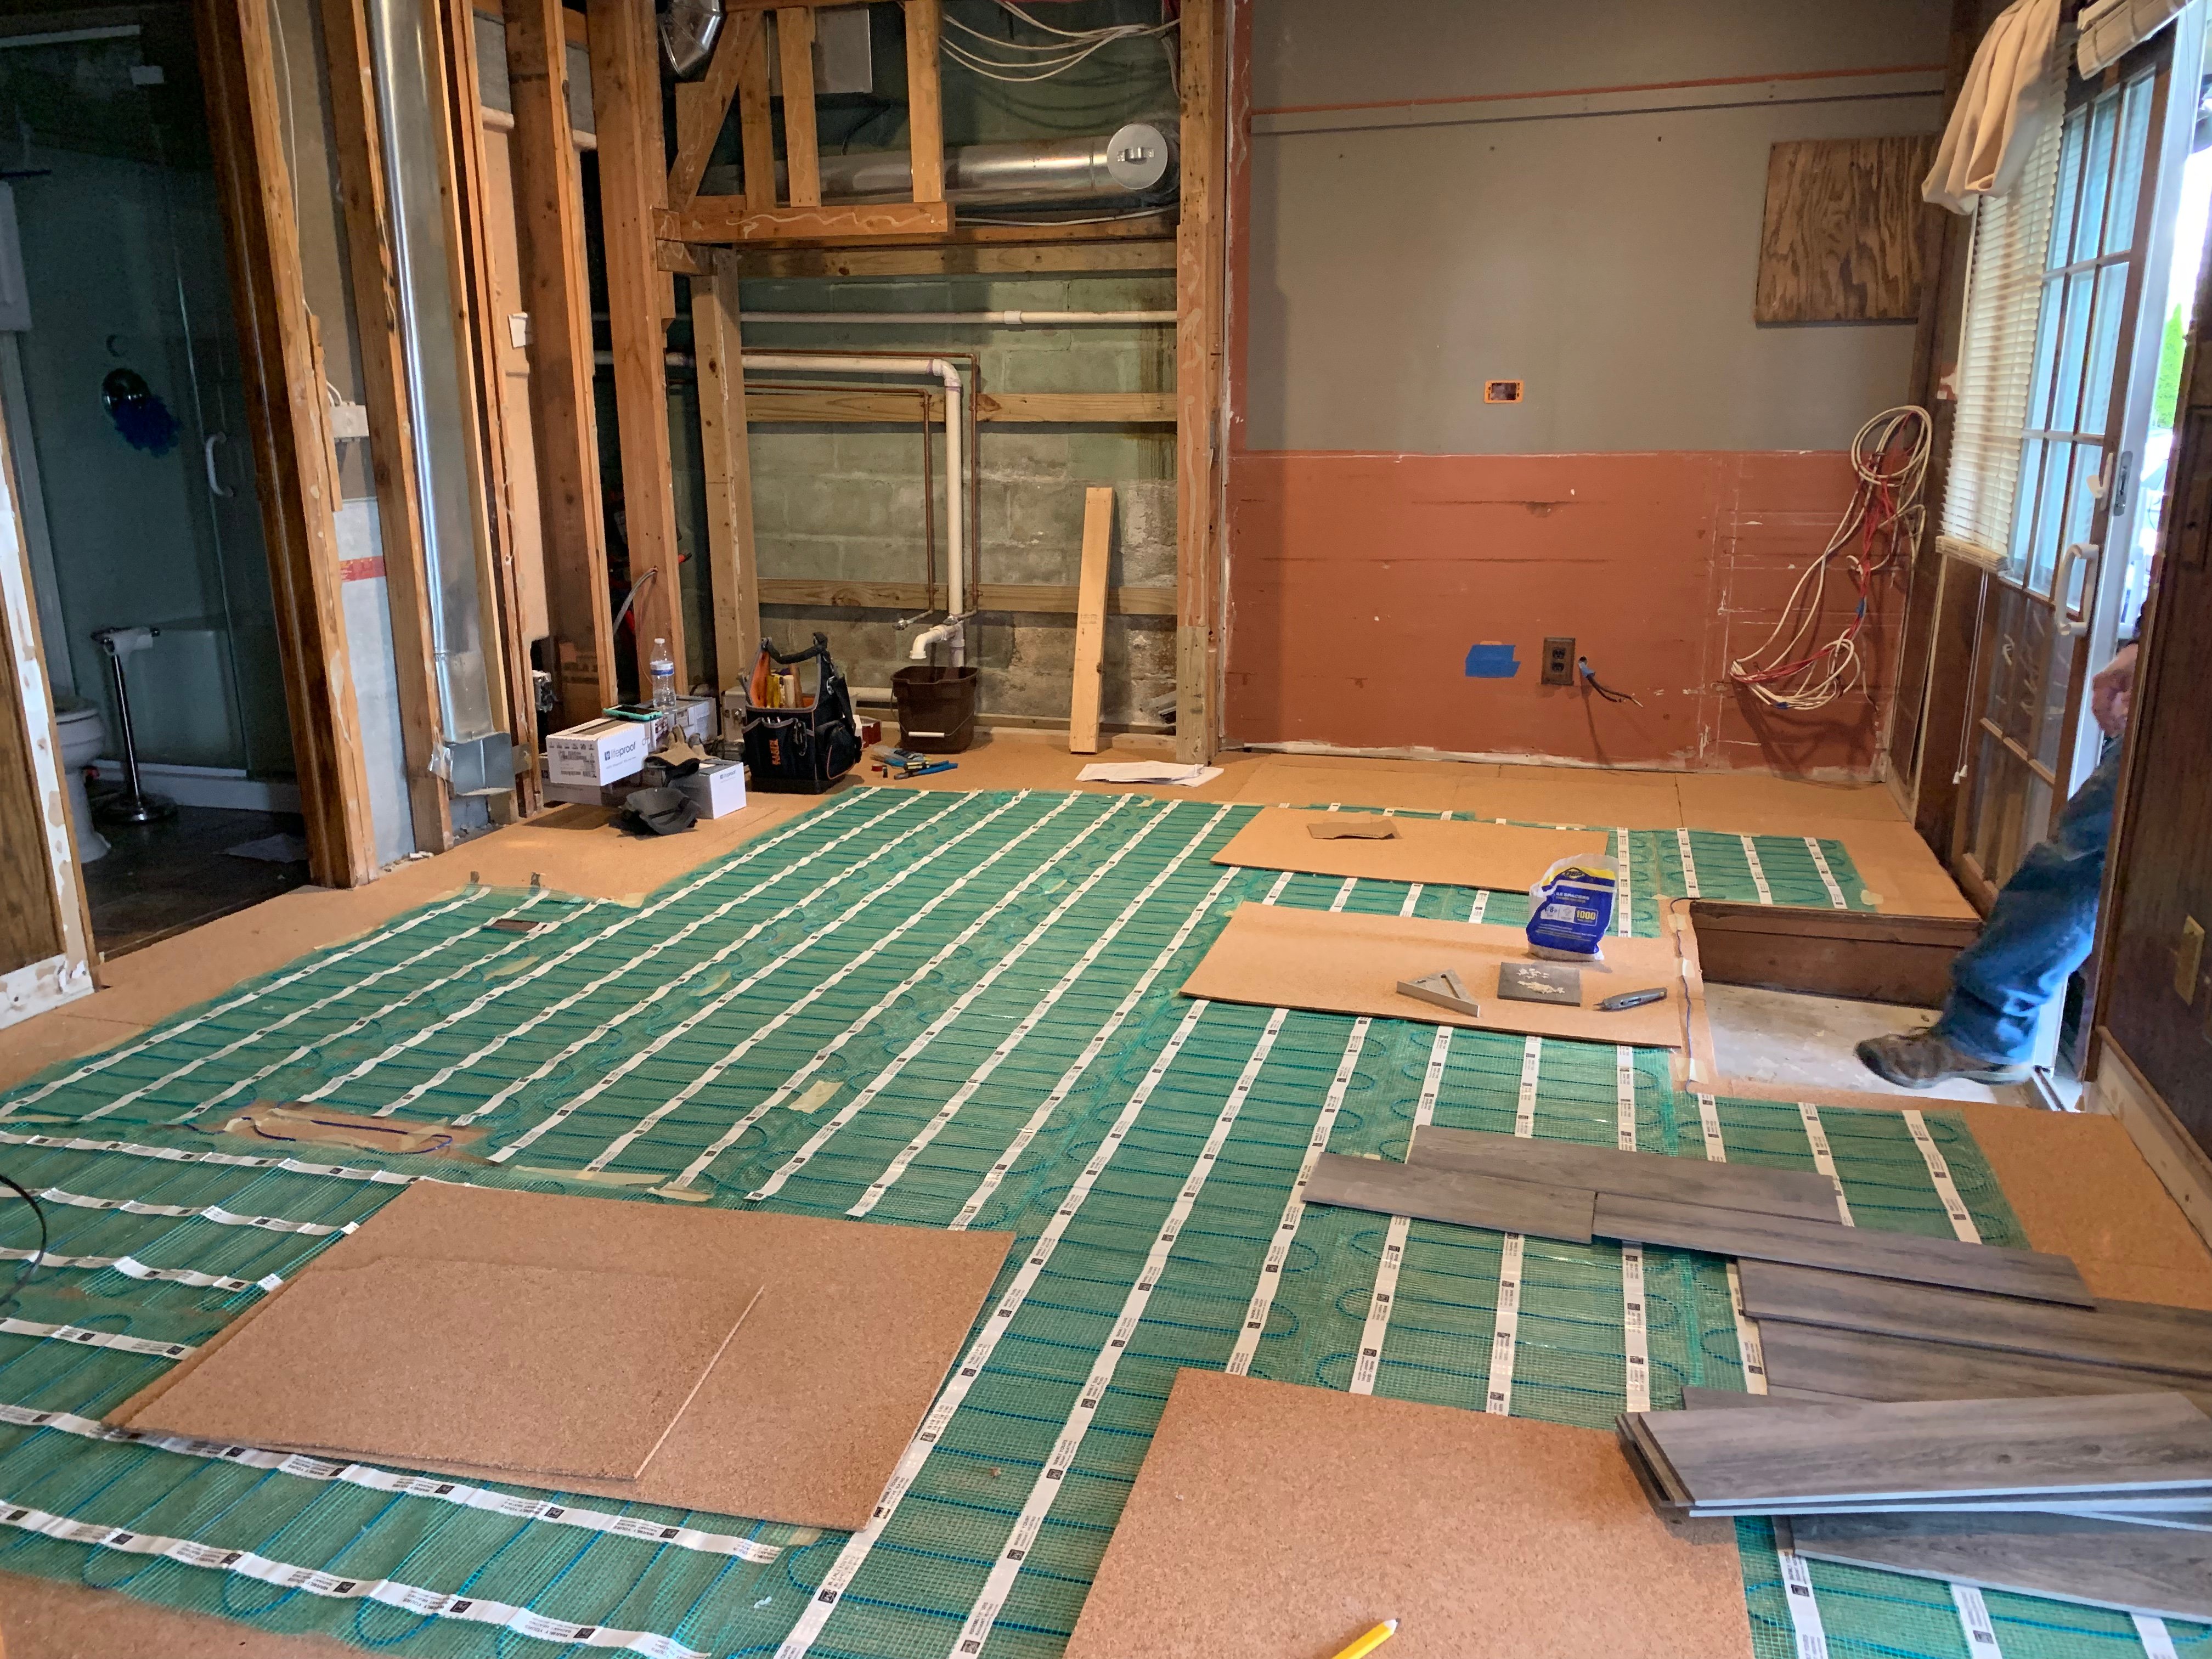 My Experience with Radiant Heat Flooring using the Cozy Winters